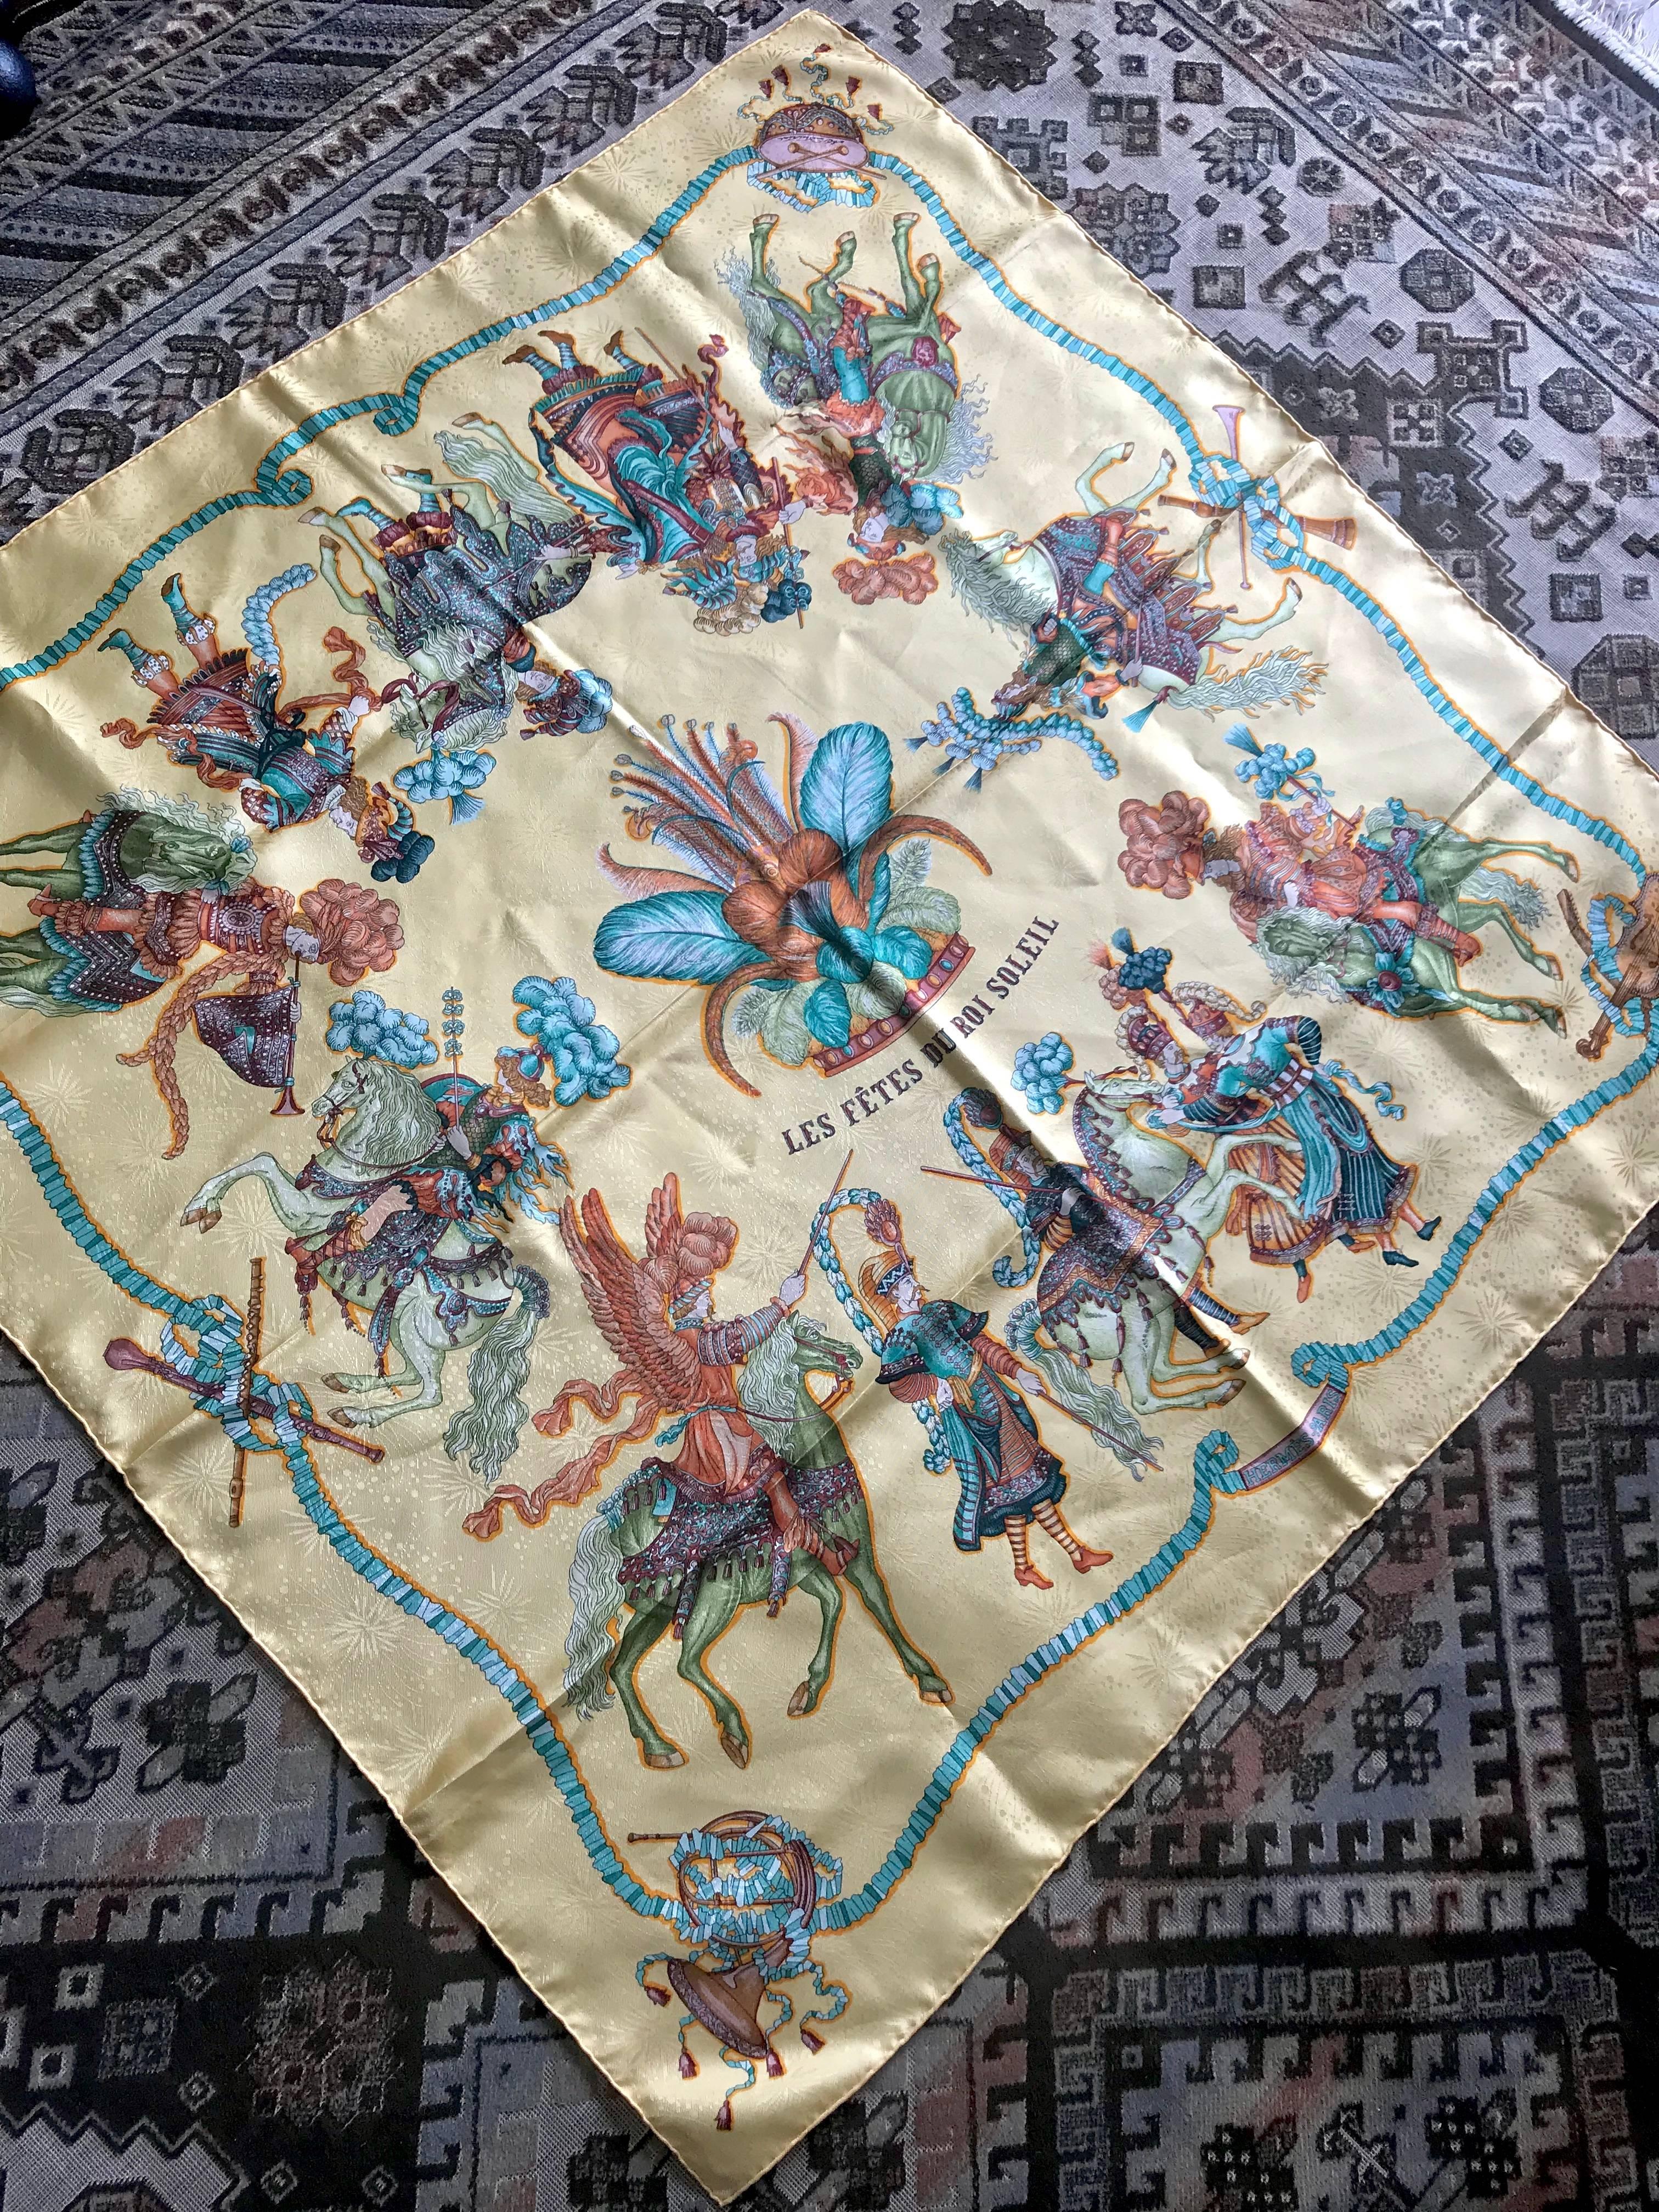 MINT/Beautiful condition! Don't miss...

1990s. Vintage HERMES Carre large silk scarf with cream yellow, blue and brown print. Best foulard.  LES FETES DU ROI SOLEIL.  Classic foulard. Perfect gift idea. 

This is a 100% twill, large size silk Carre